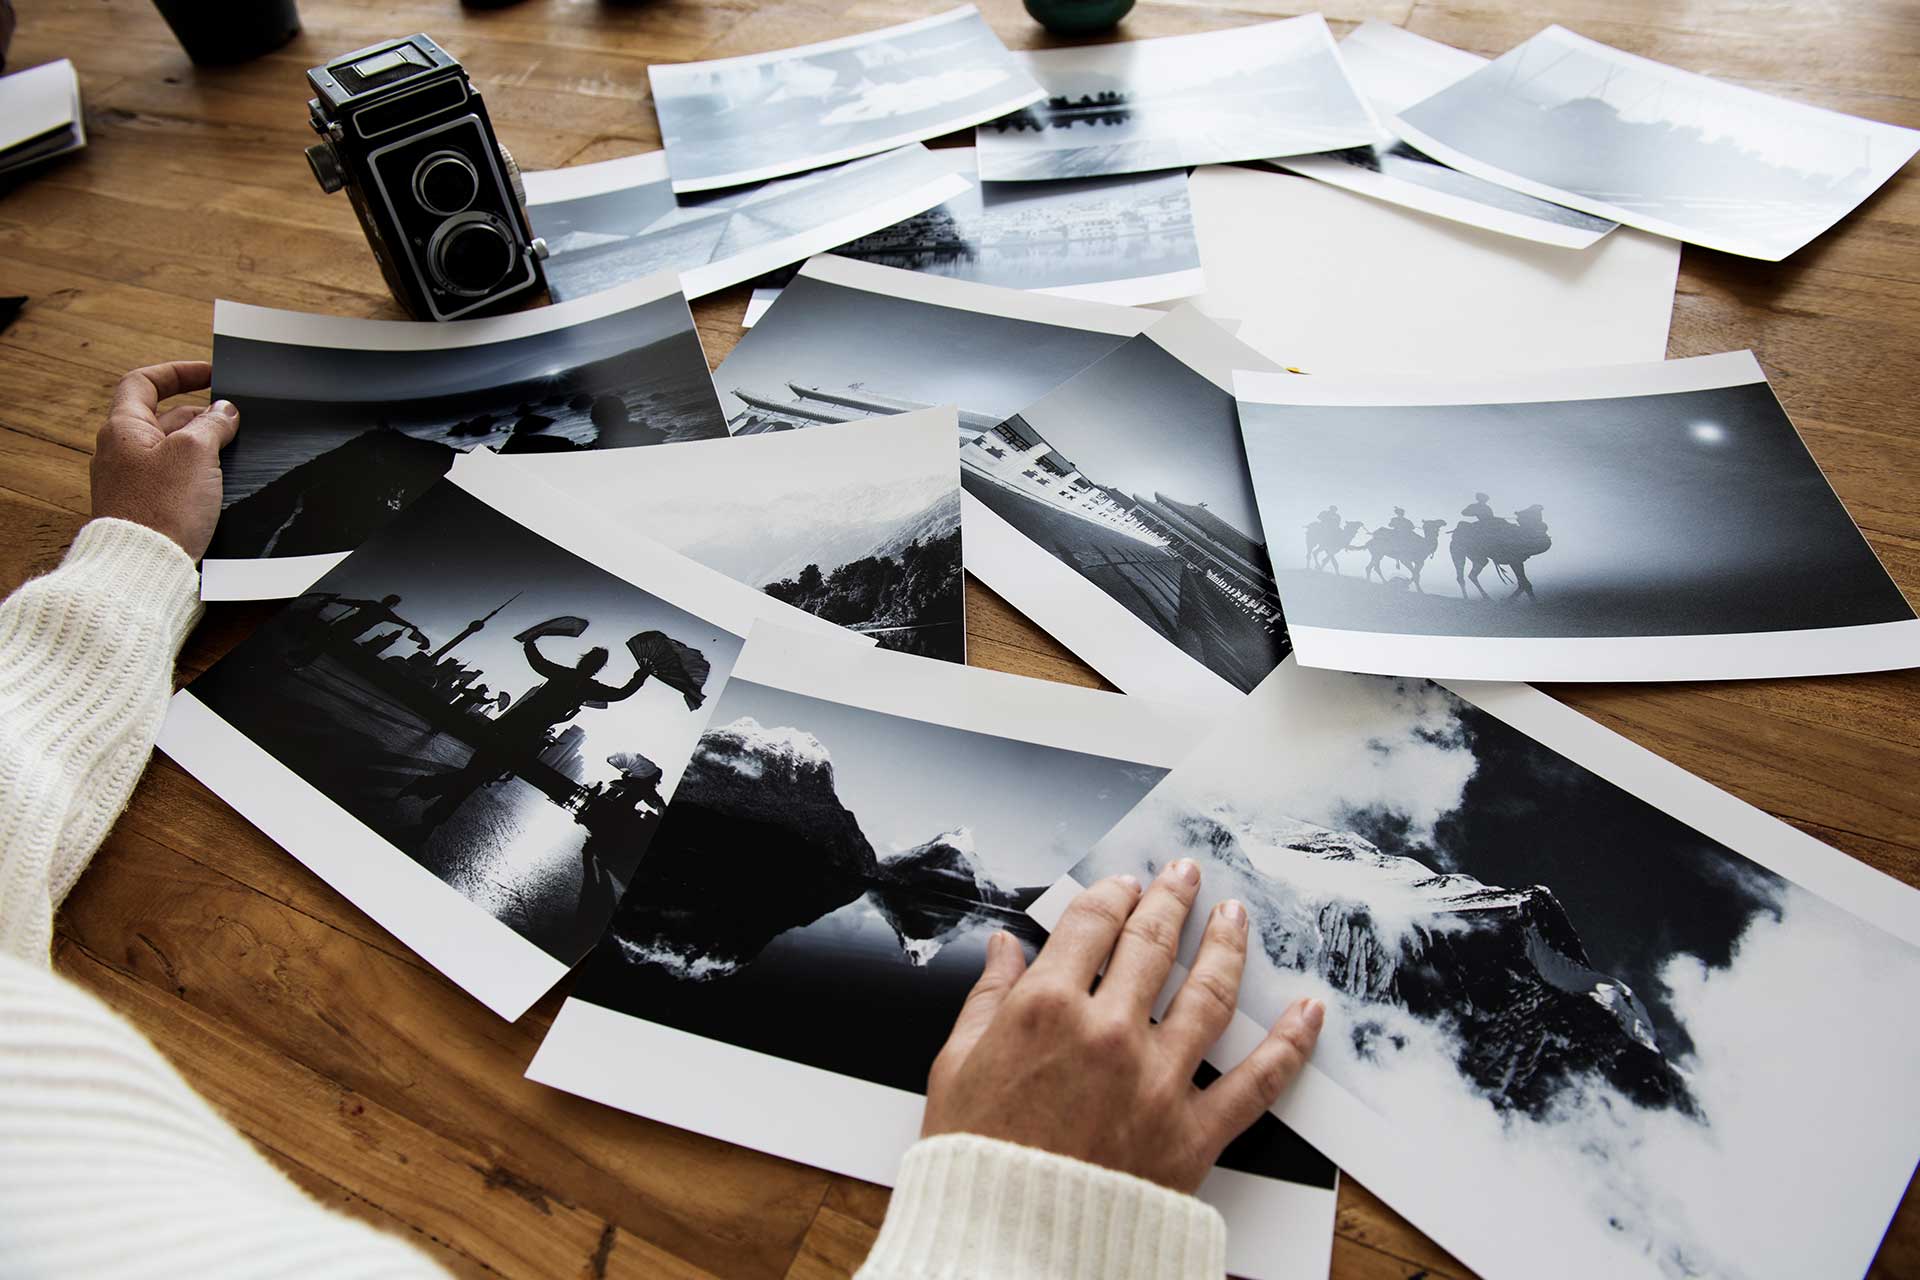 Learn Photography from Every Photo Produced